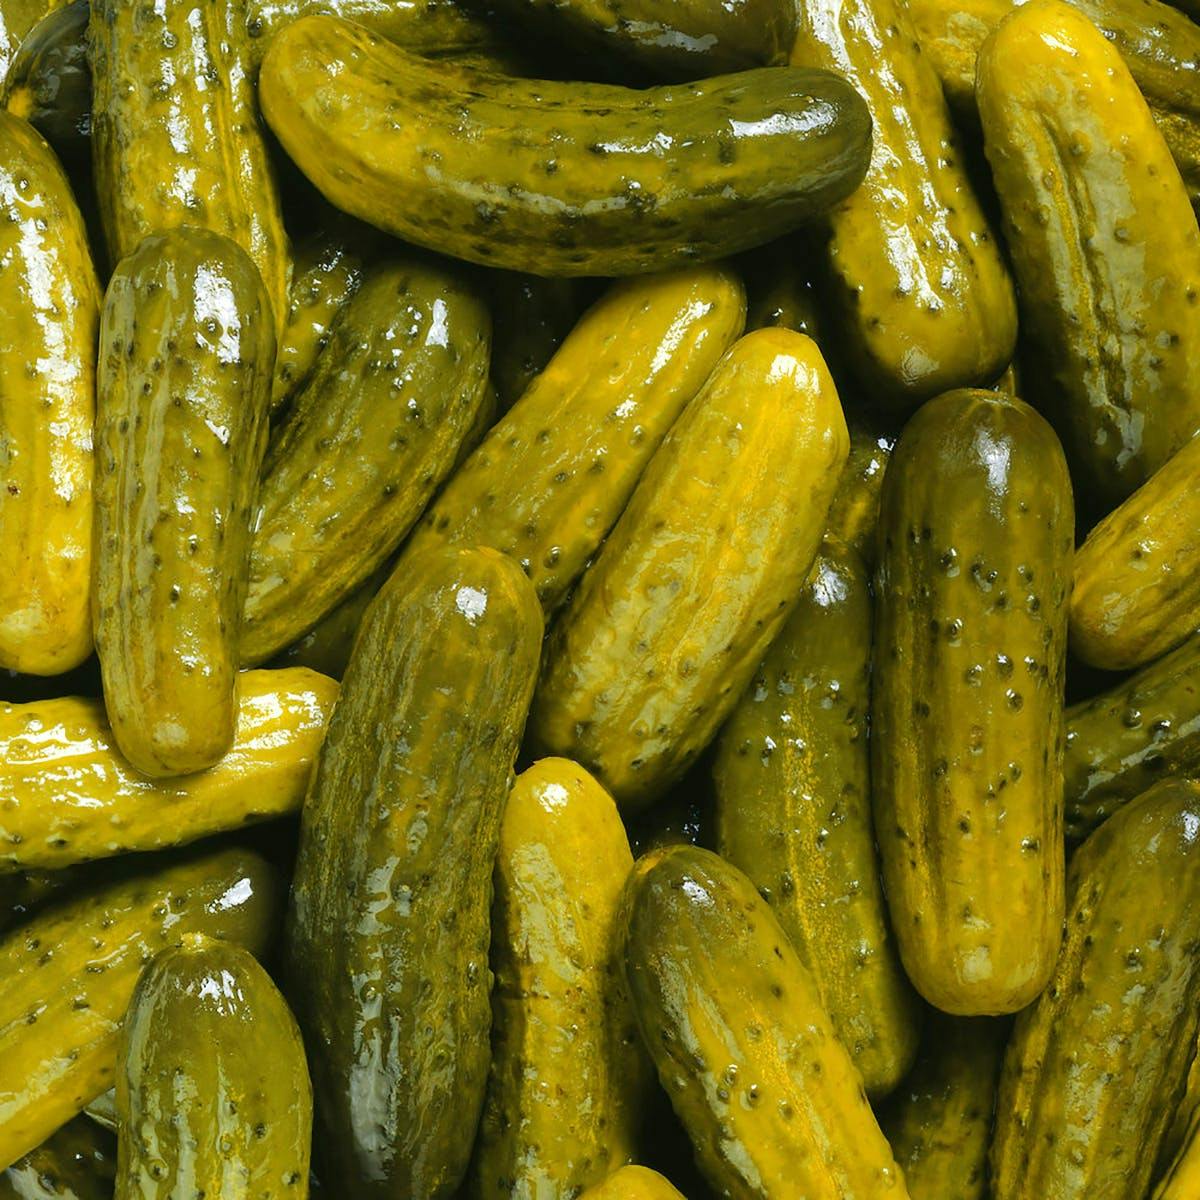 Pickles Delivery, Ship Nationwide